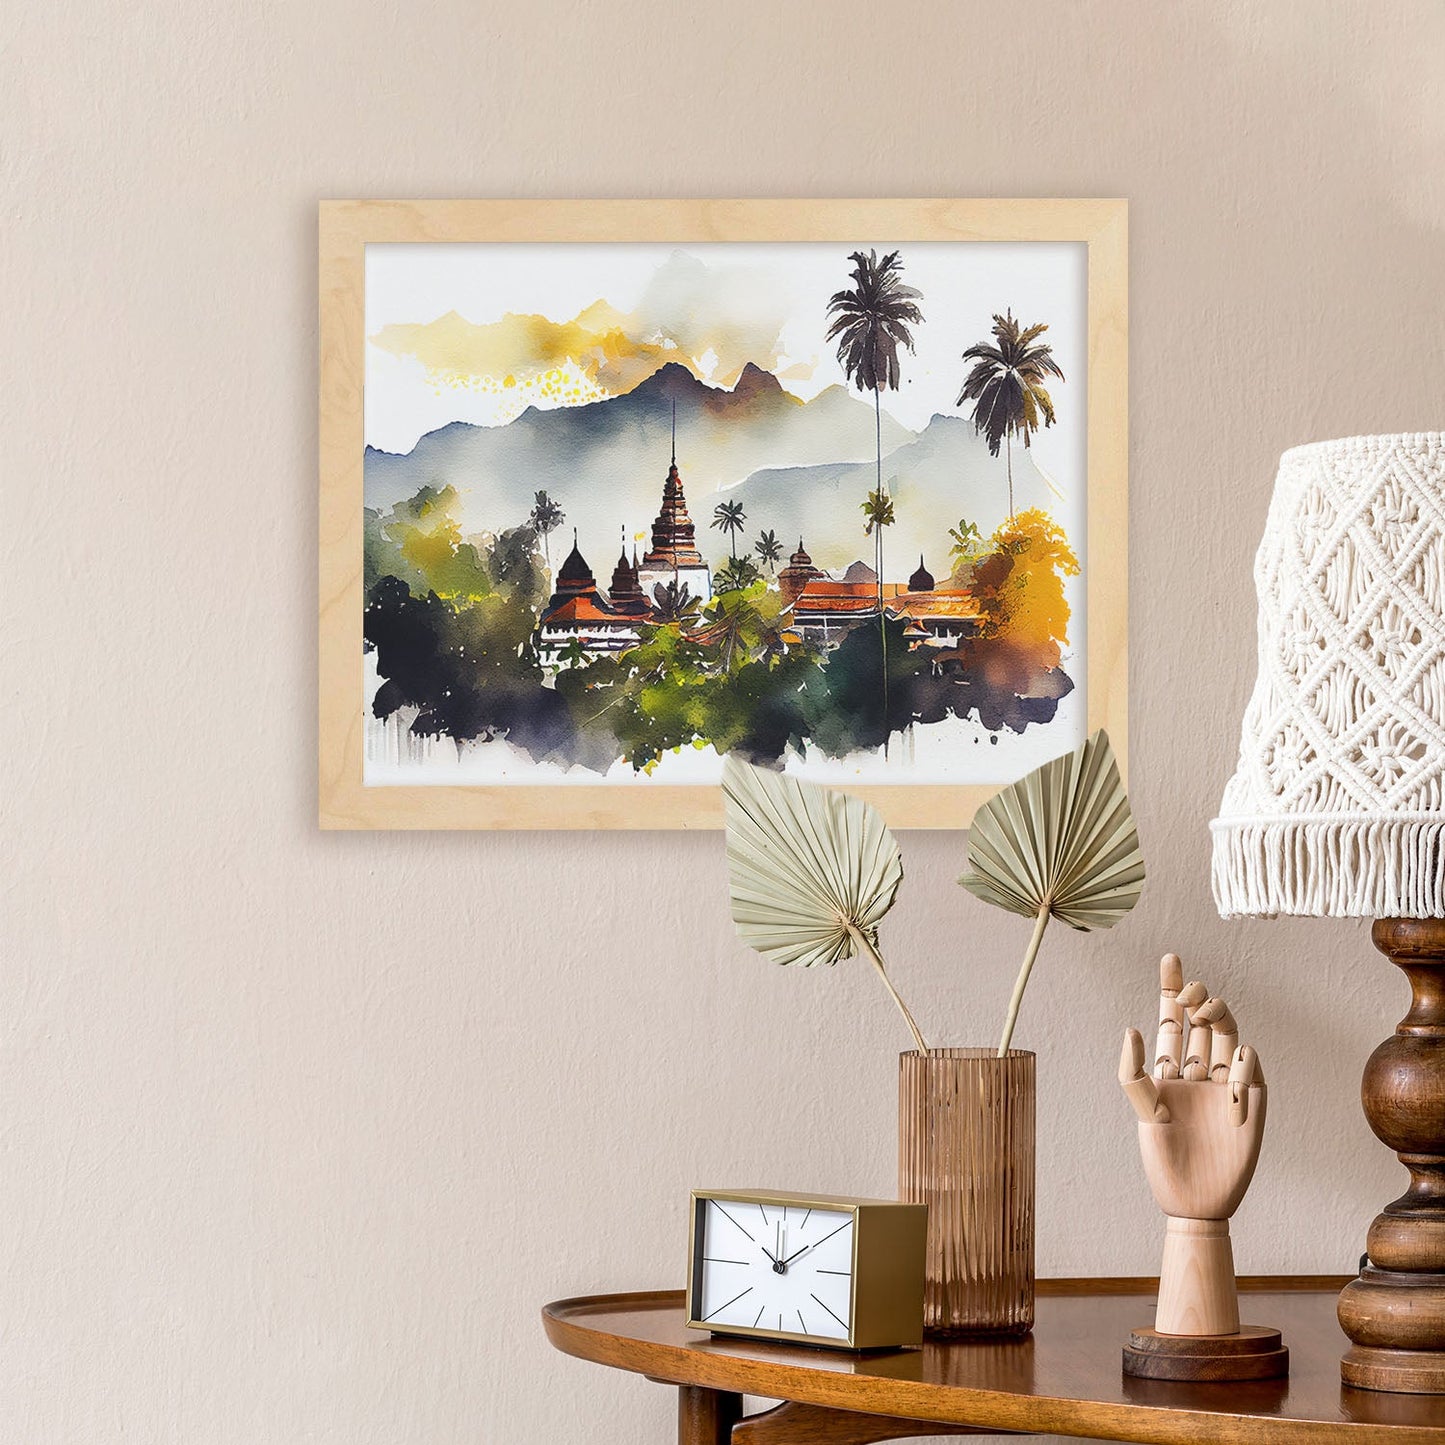 Nacnic watercolor of a skyline of the city of Luang Prabang. Aesthetic Wall Art Prints for Bedroom or Living Room Design.